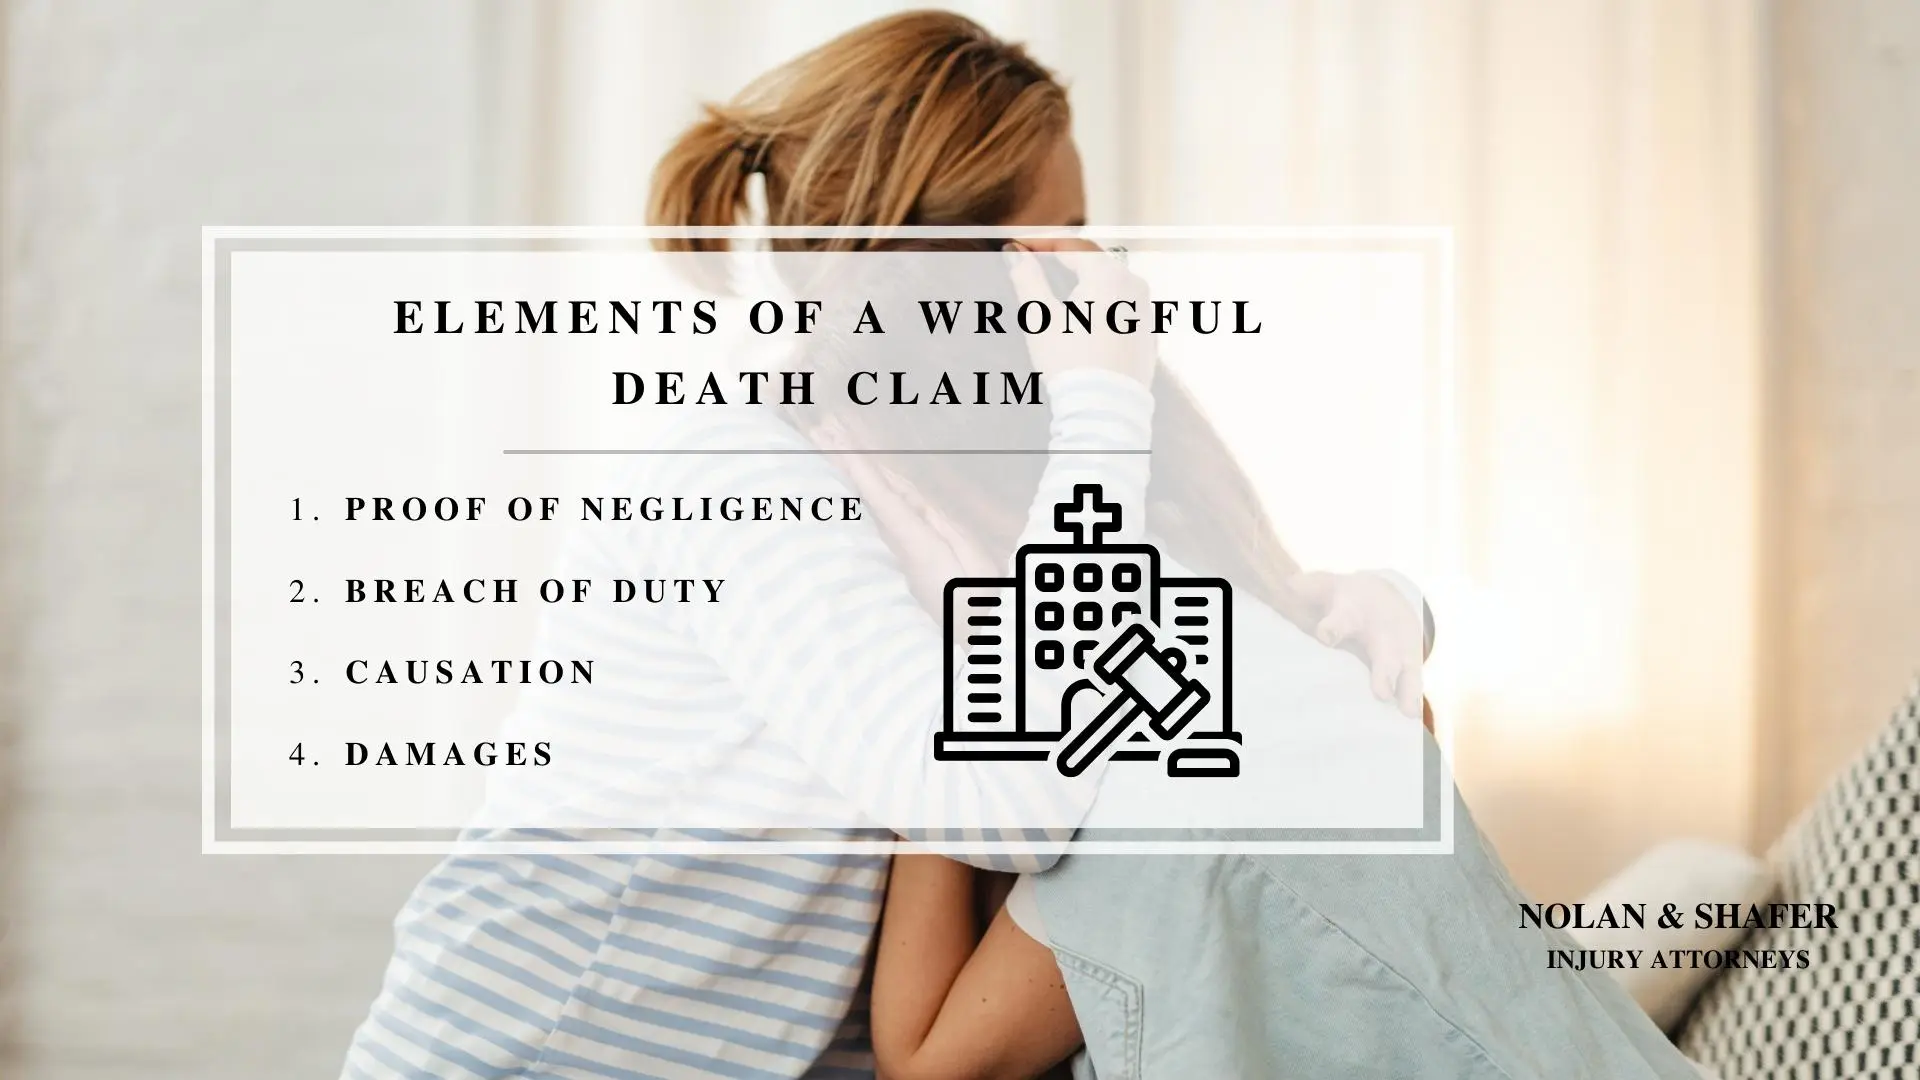 Infographic image of elements of a wrongful death claim